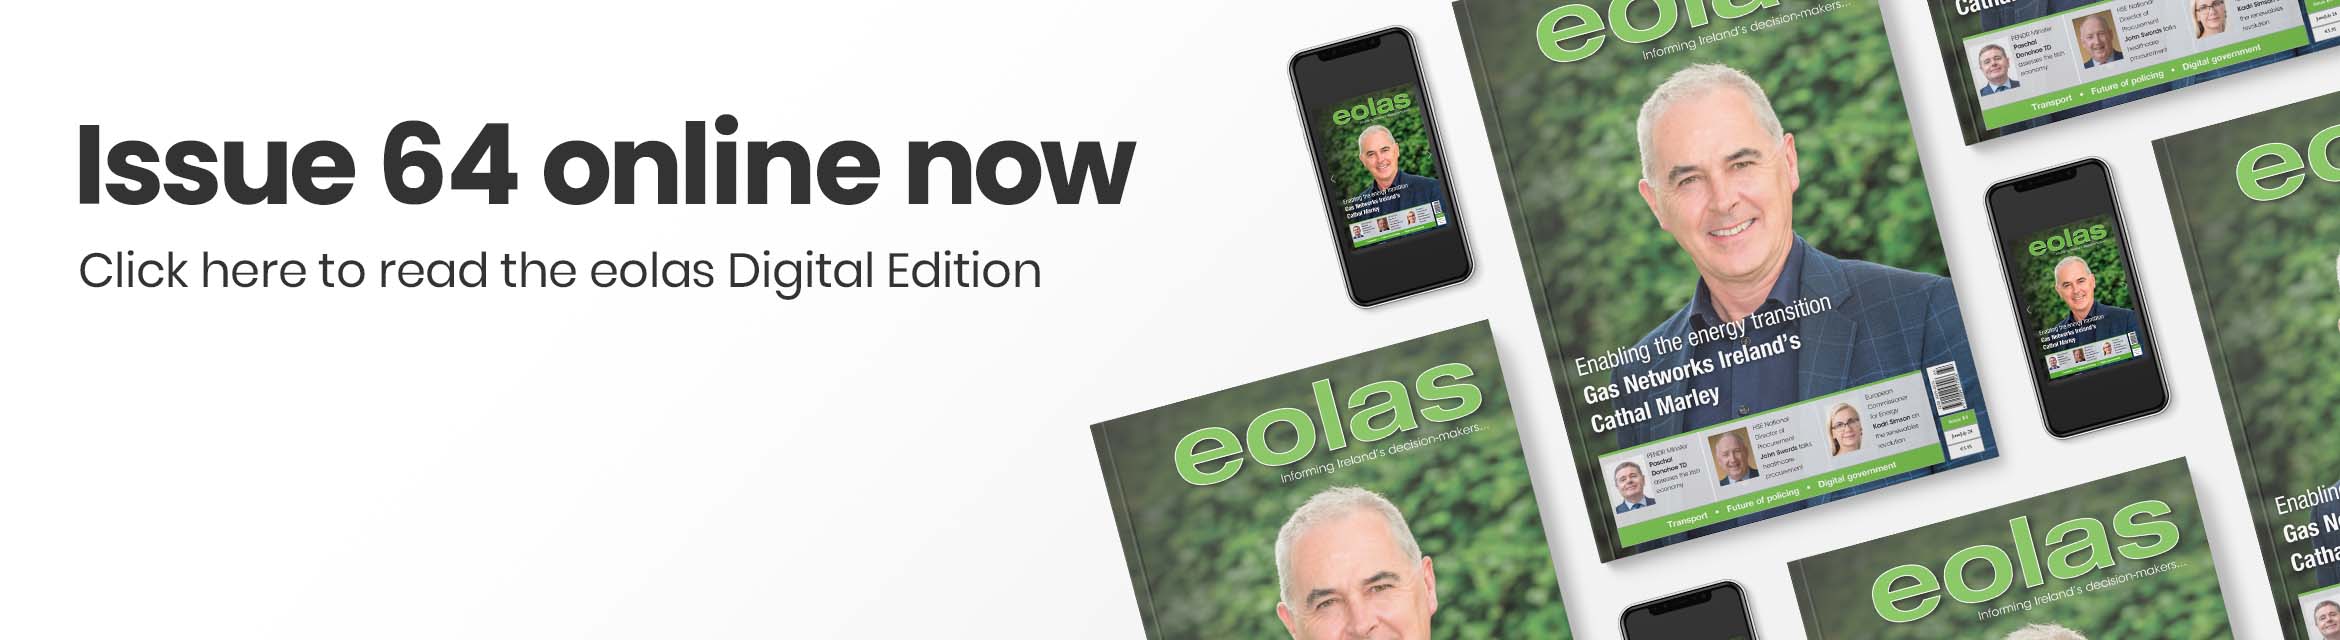 Issue 64 online now • Read the eolas Digital Edition